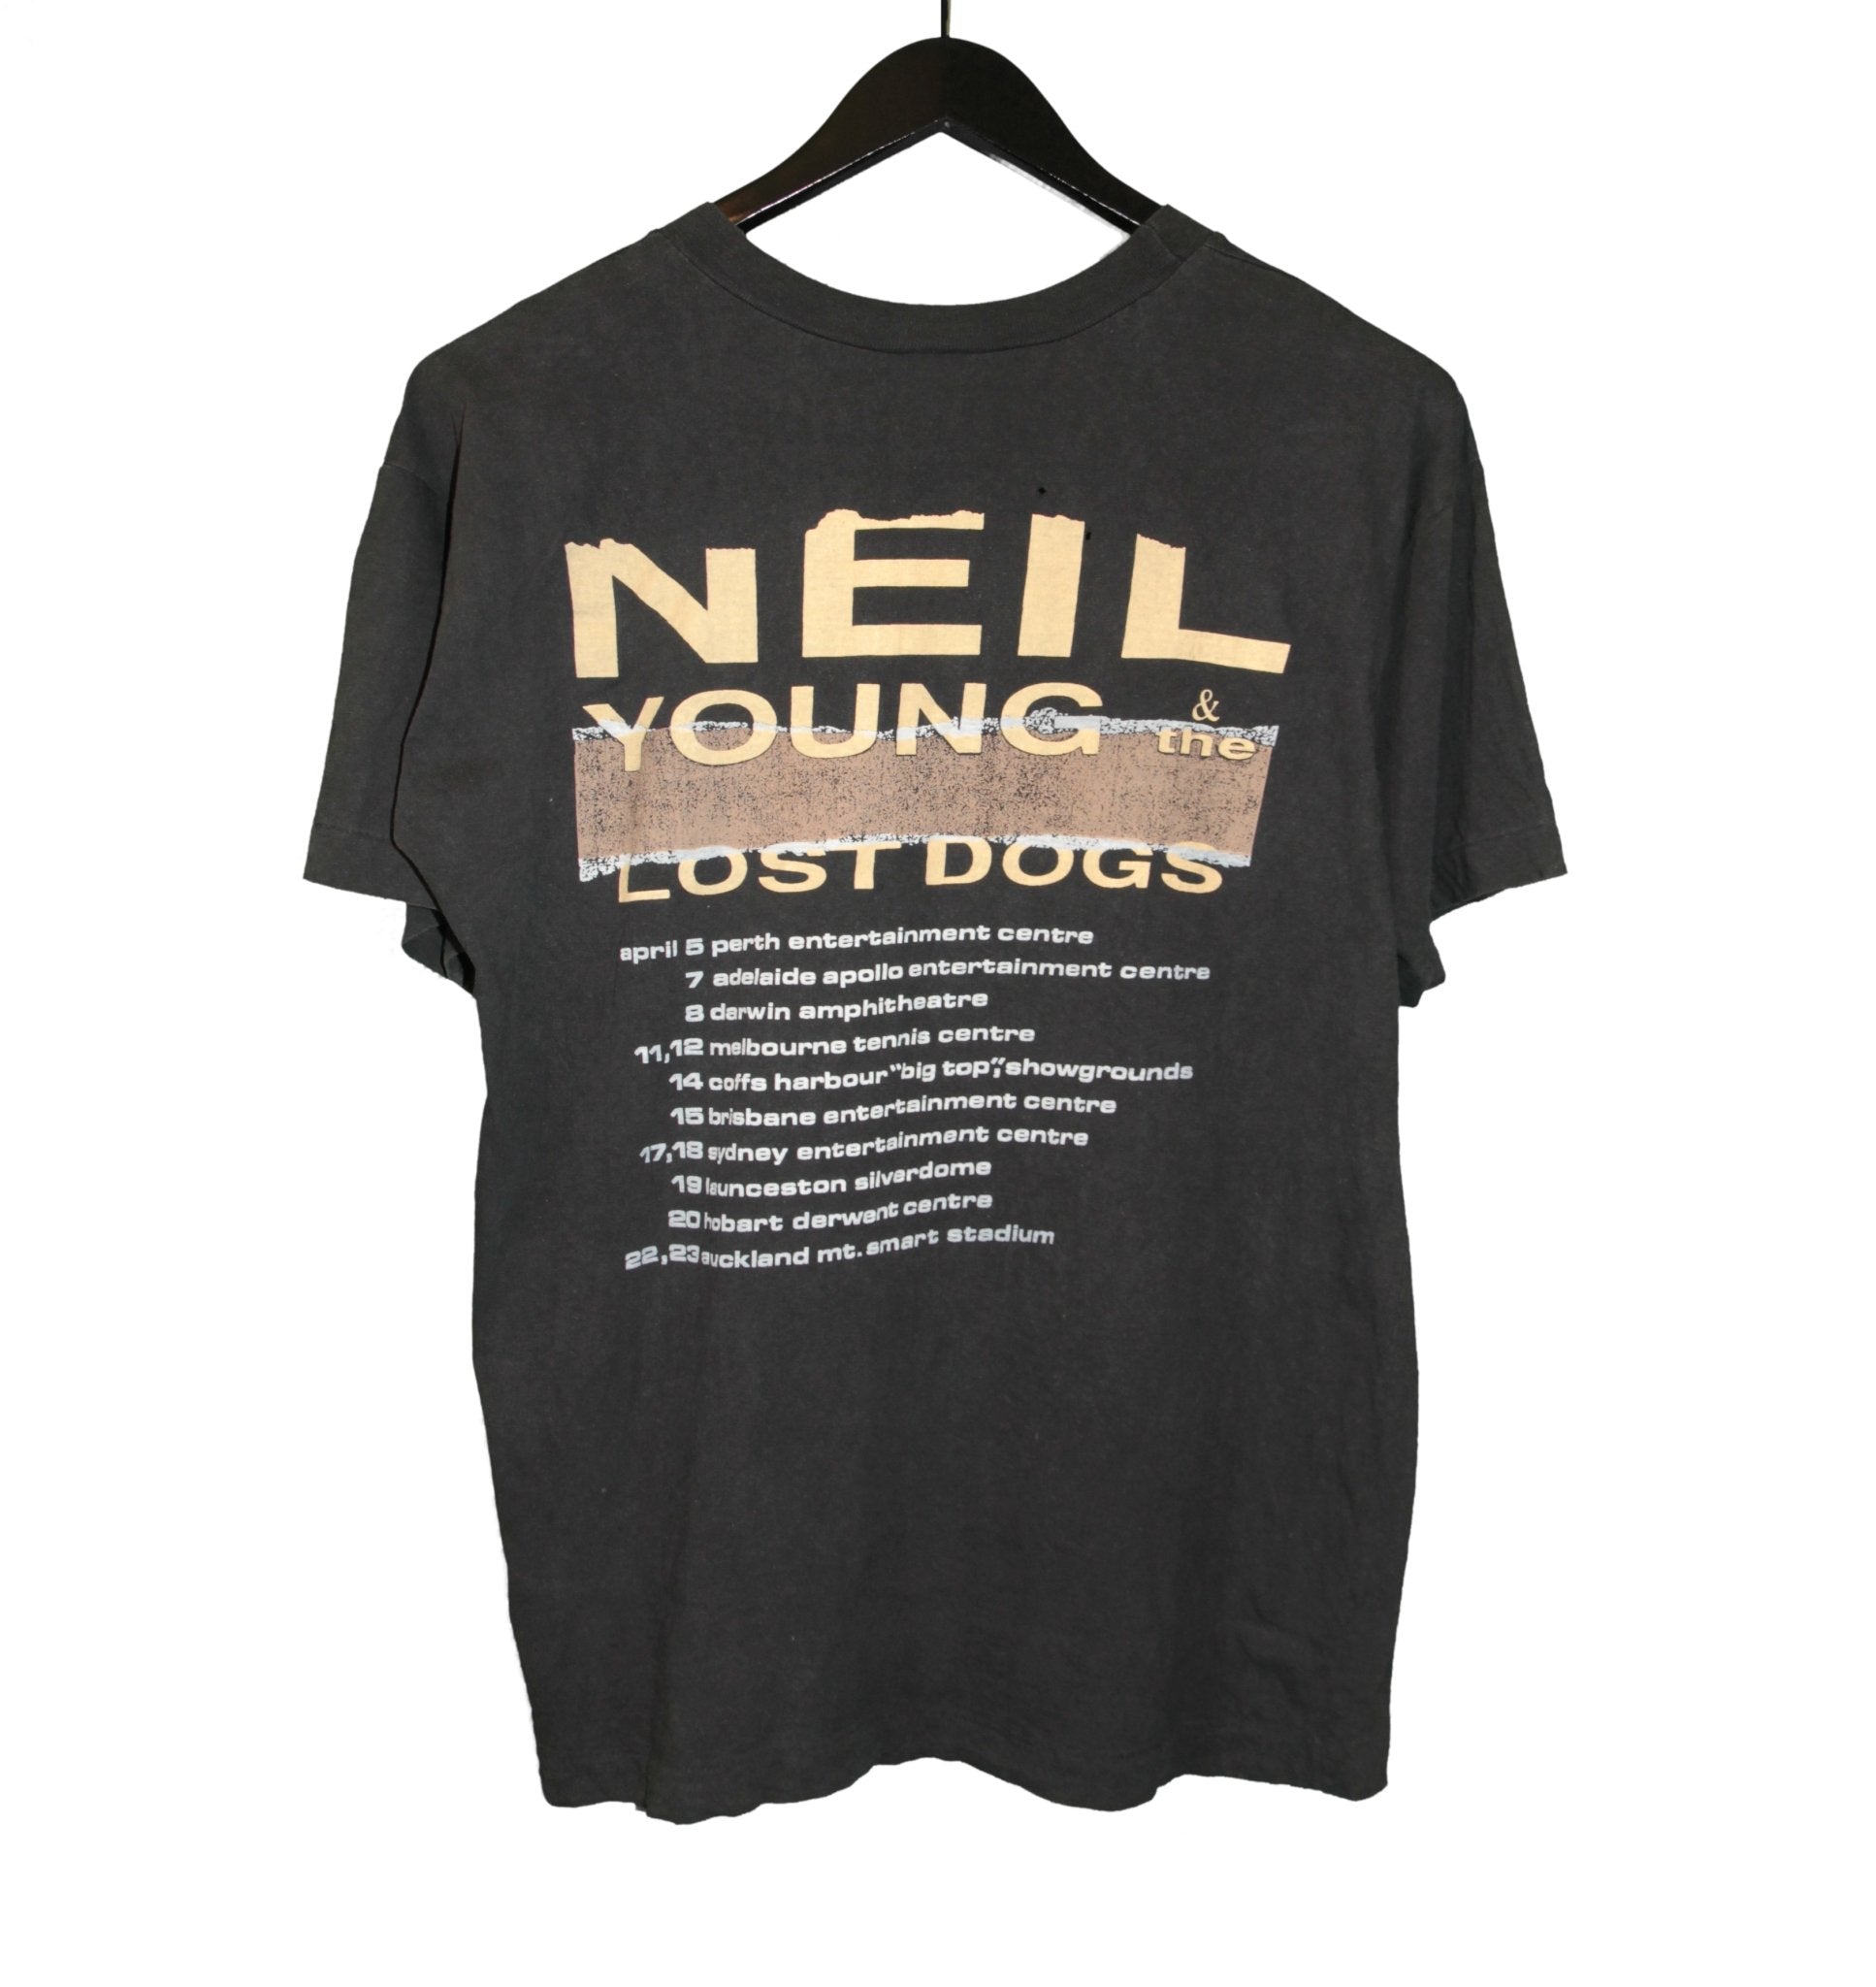 Neil Young & The Lost Dogs 1989 Tour Shirt - Faded AU